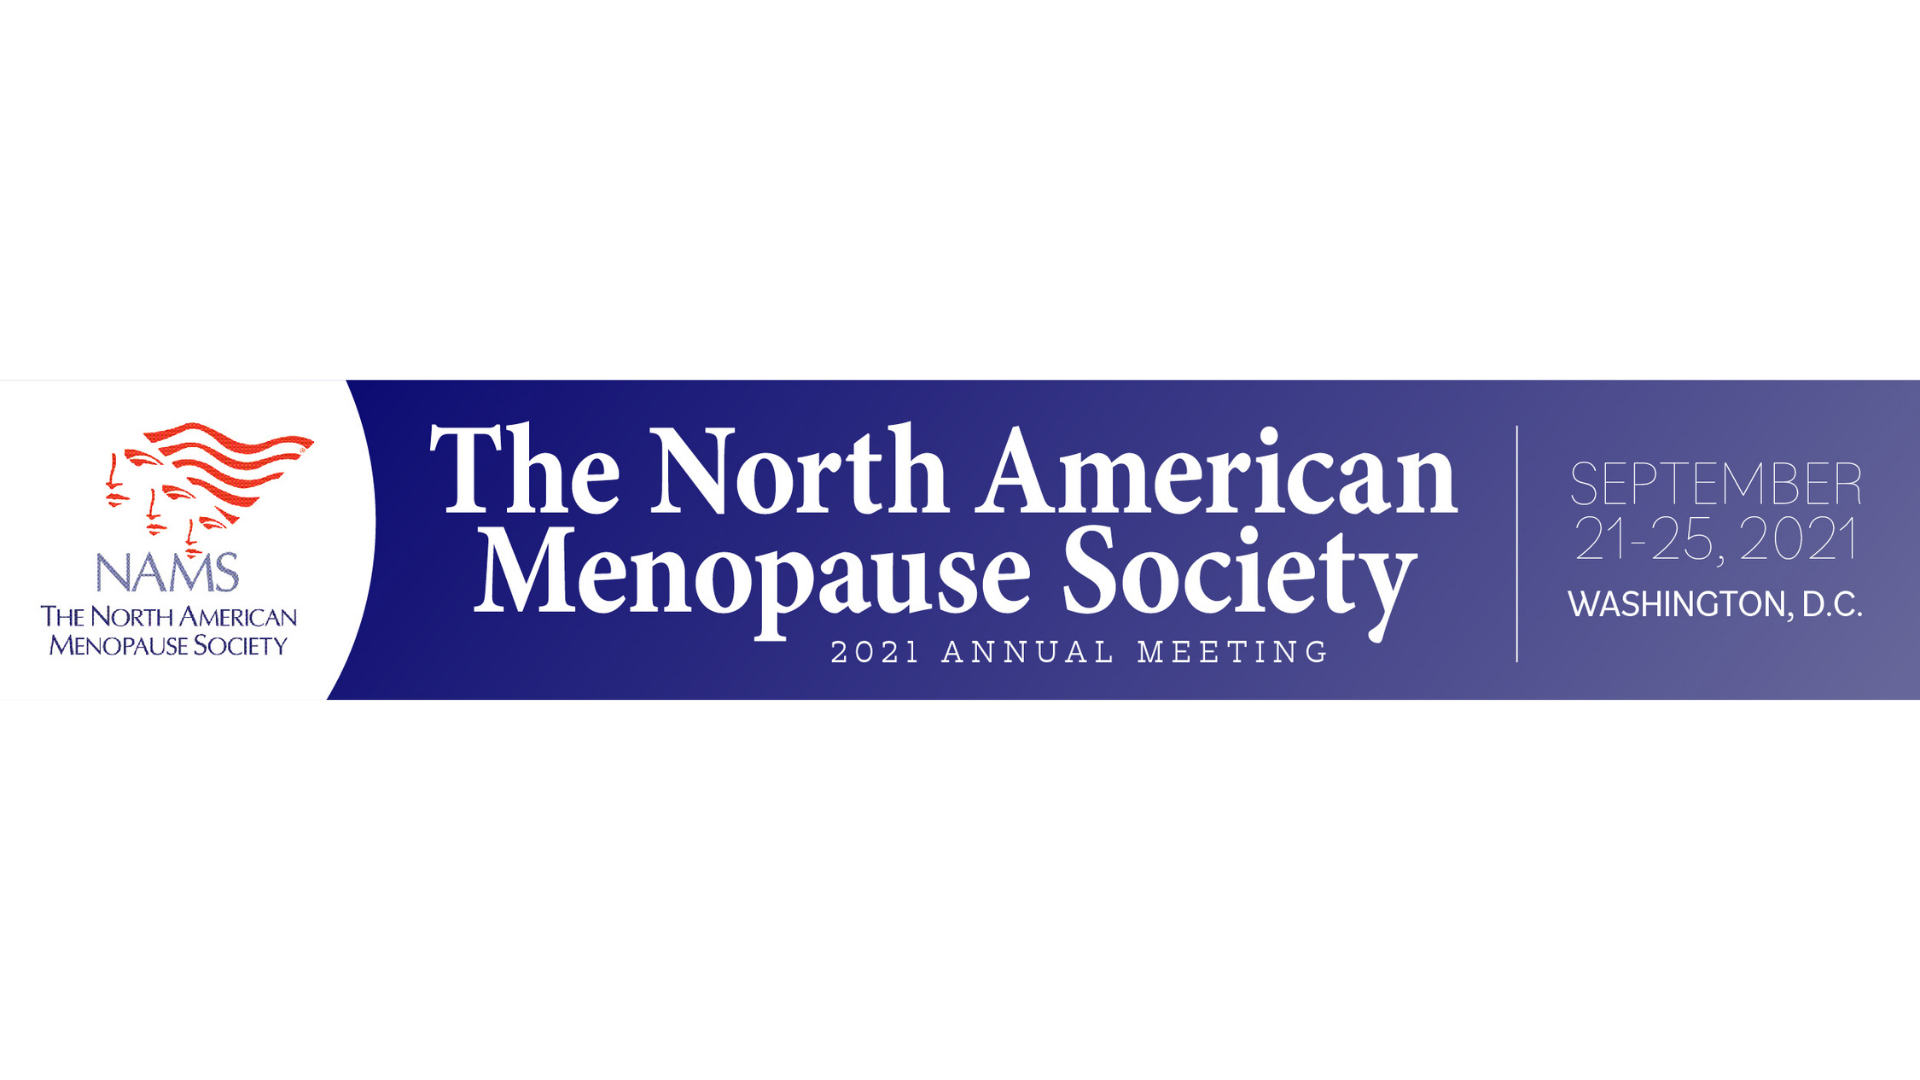 The North American Menopause Society’s 2021 Annual Meeting has officially begun